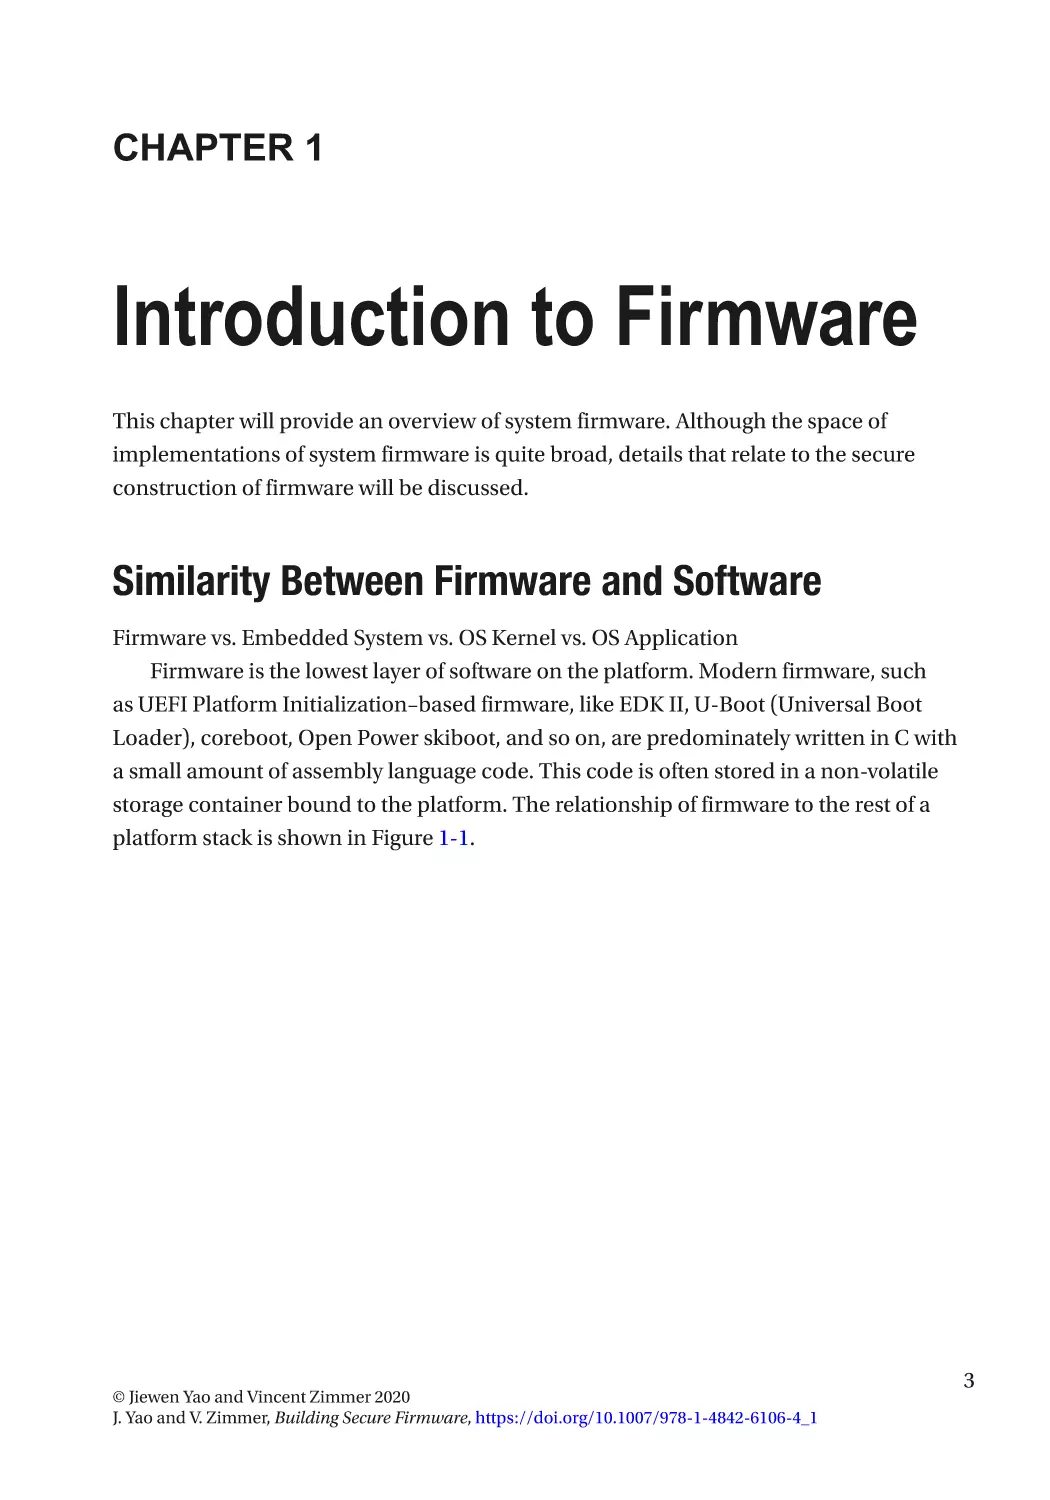 Chapter 1
Similarity Between Firmware and Software